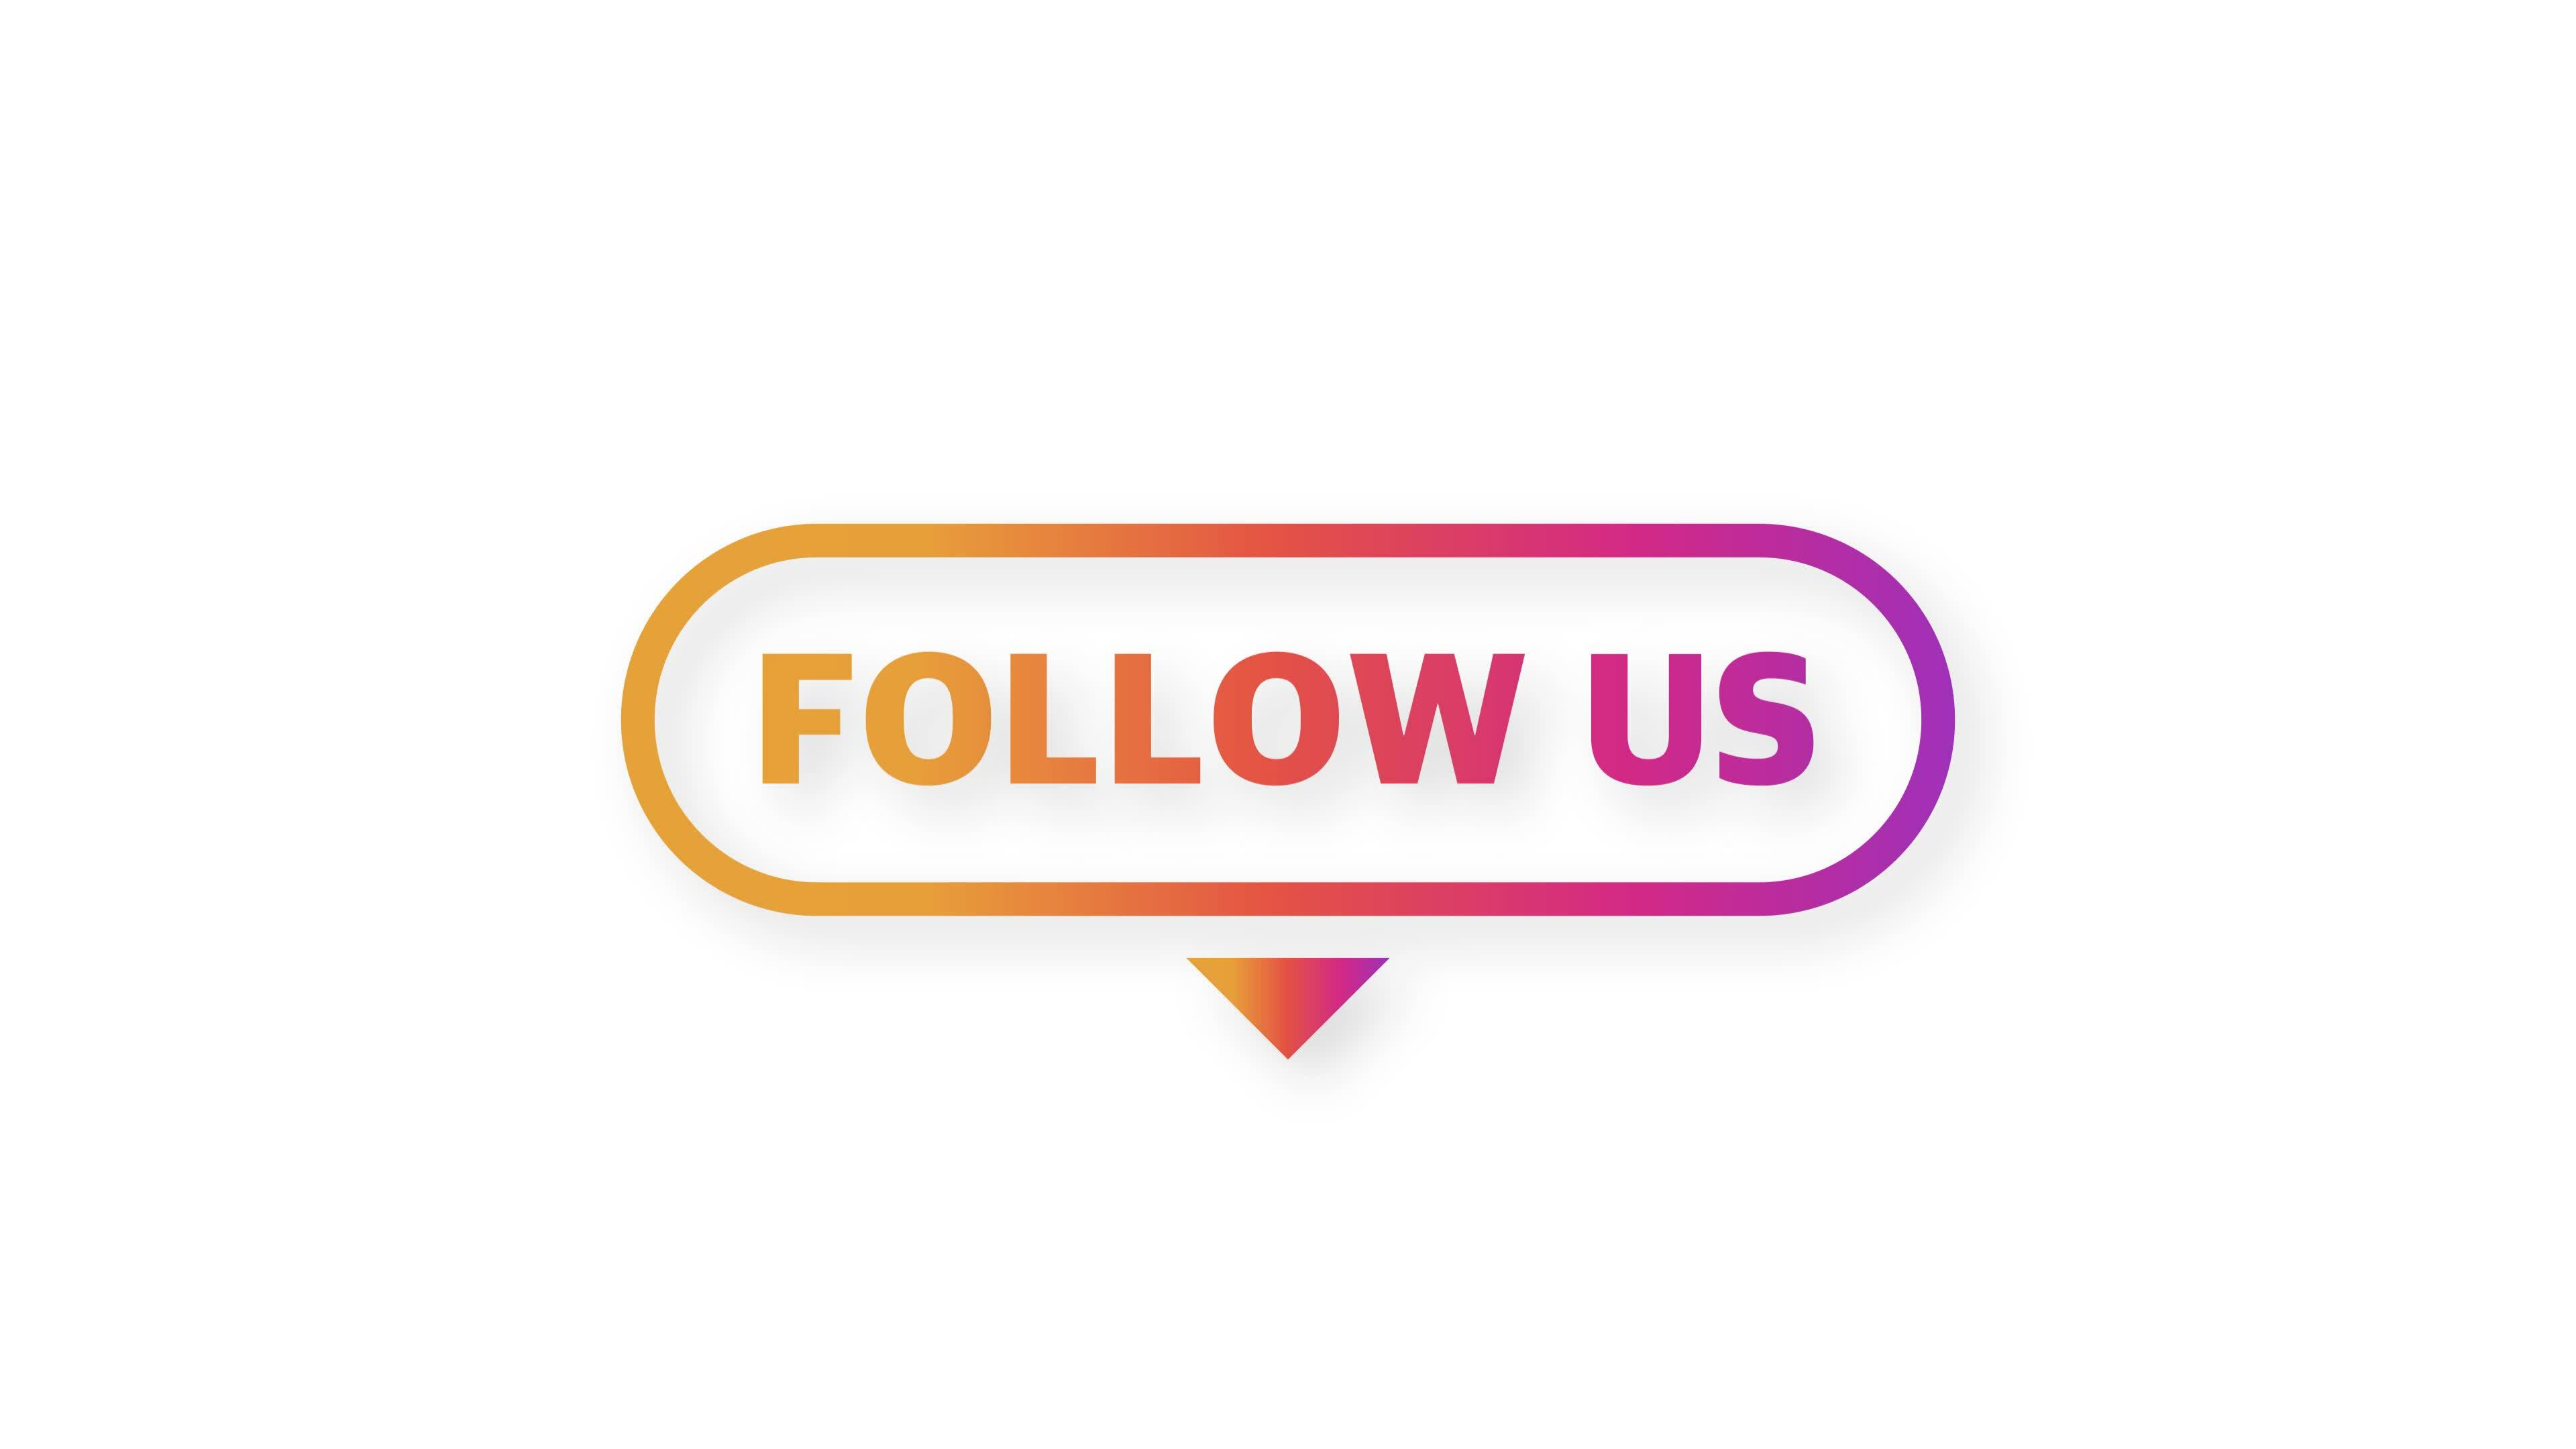 Follow us megaphone pink banner in 3D style on white background. Motion ...